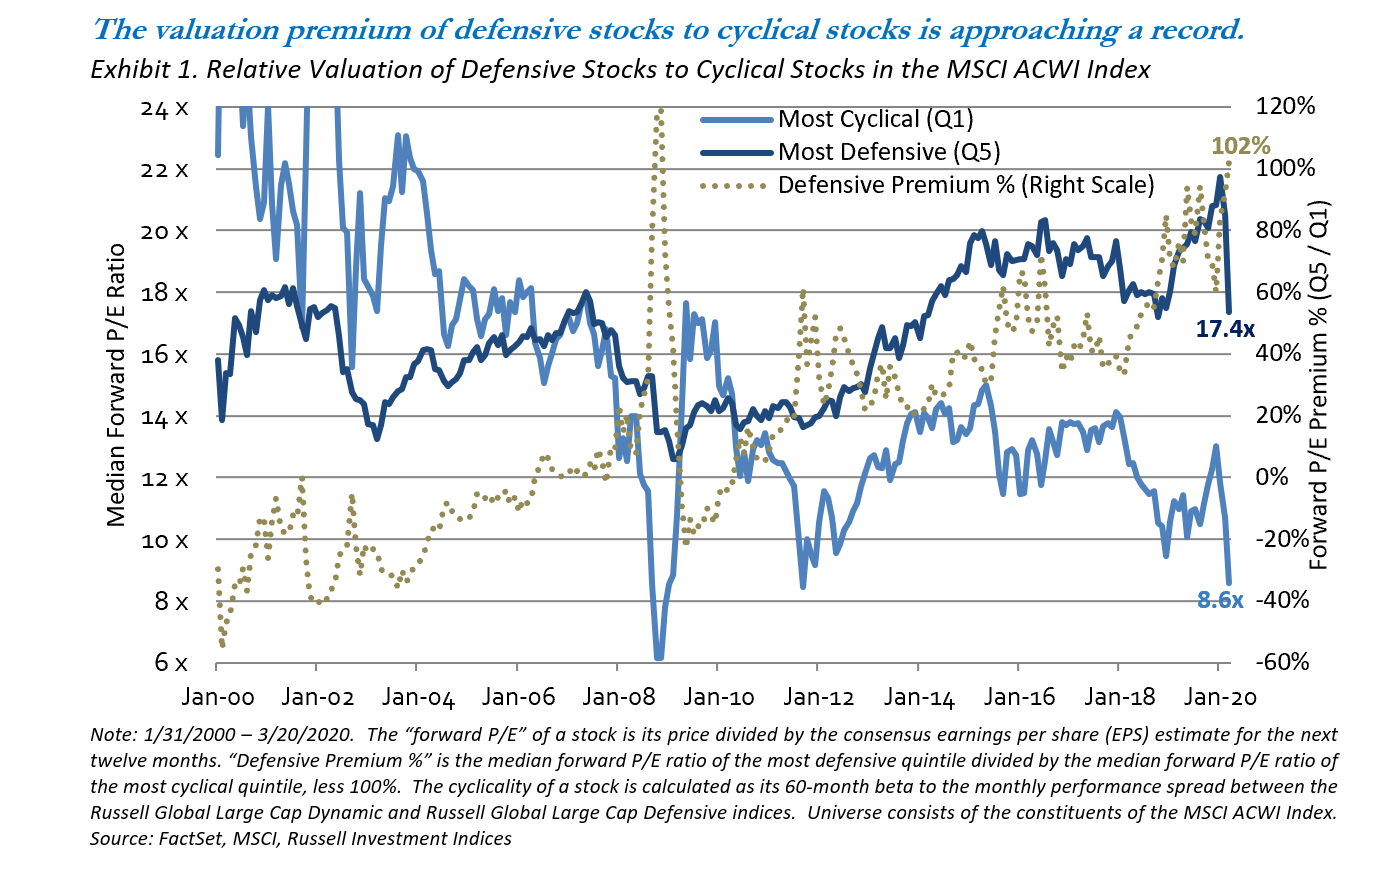 Exhibit 1. Relative Valuation of Defensive Stocks to Cyclical Stocks in the MSCI ACWI Index